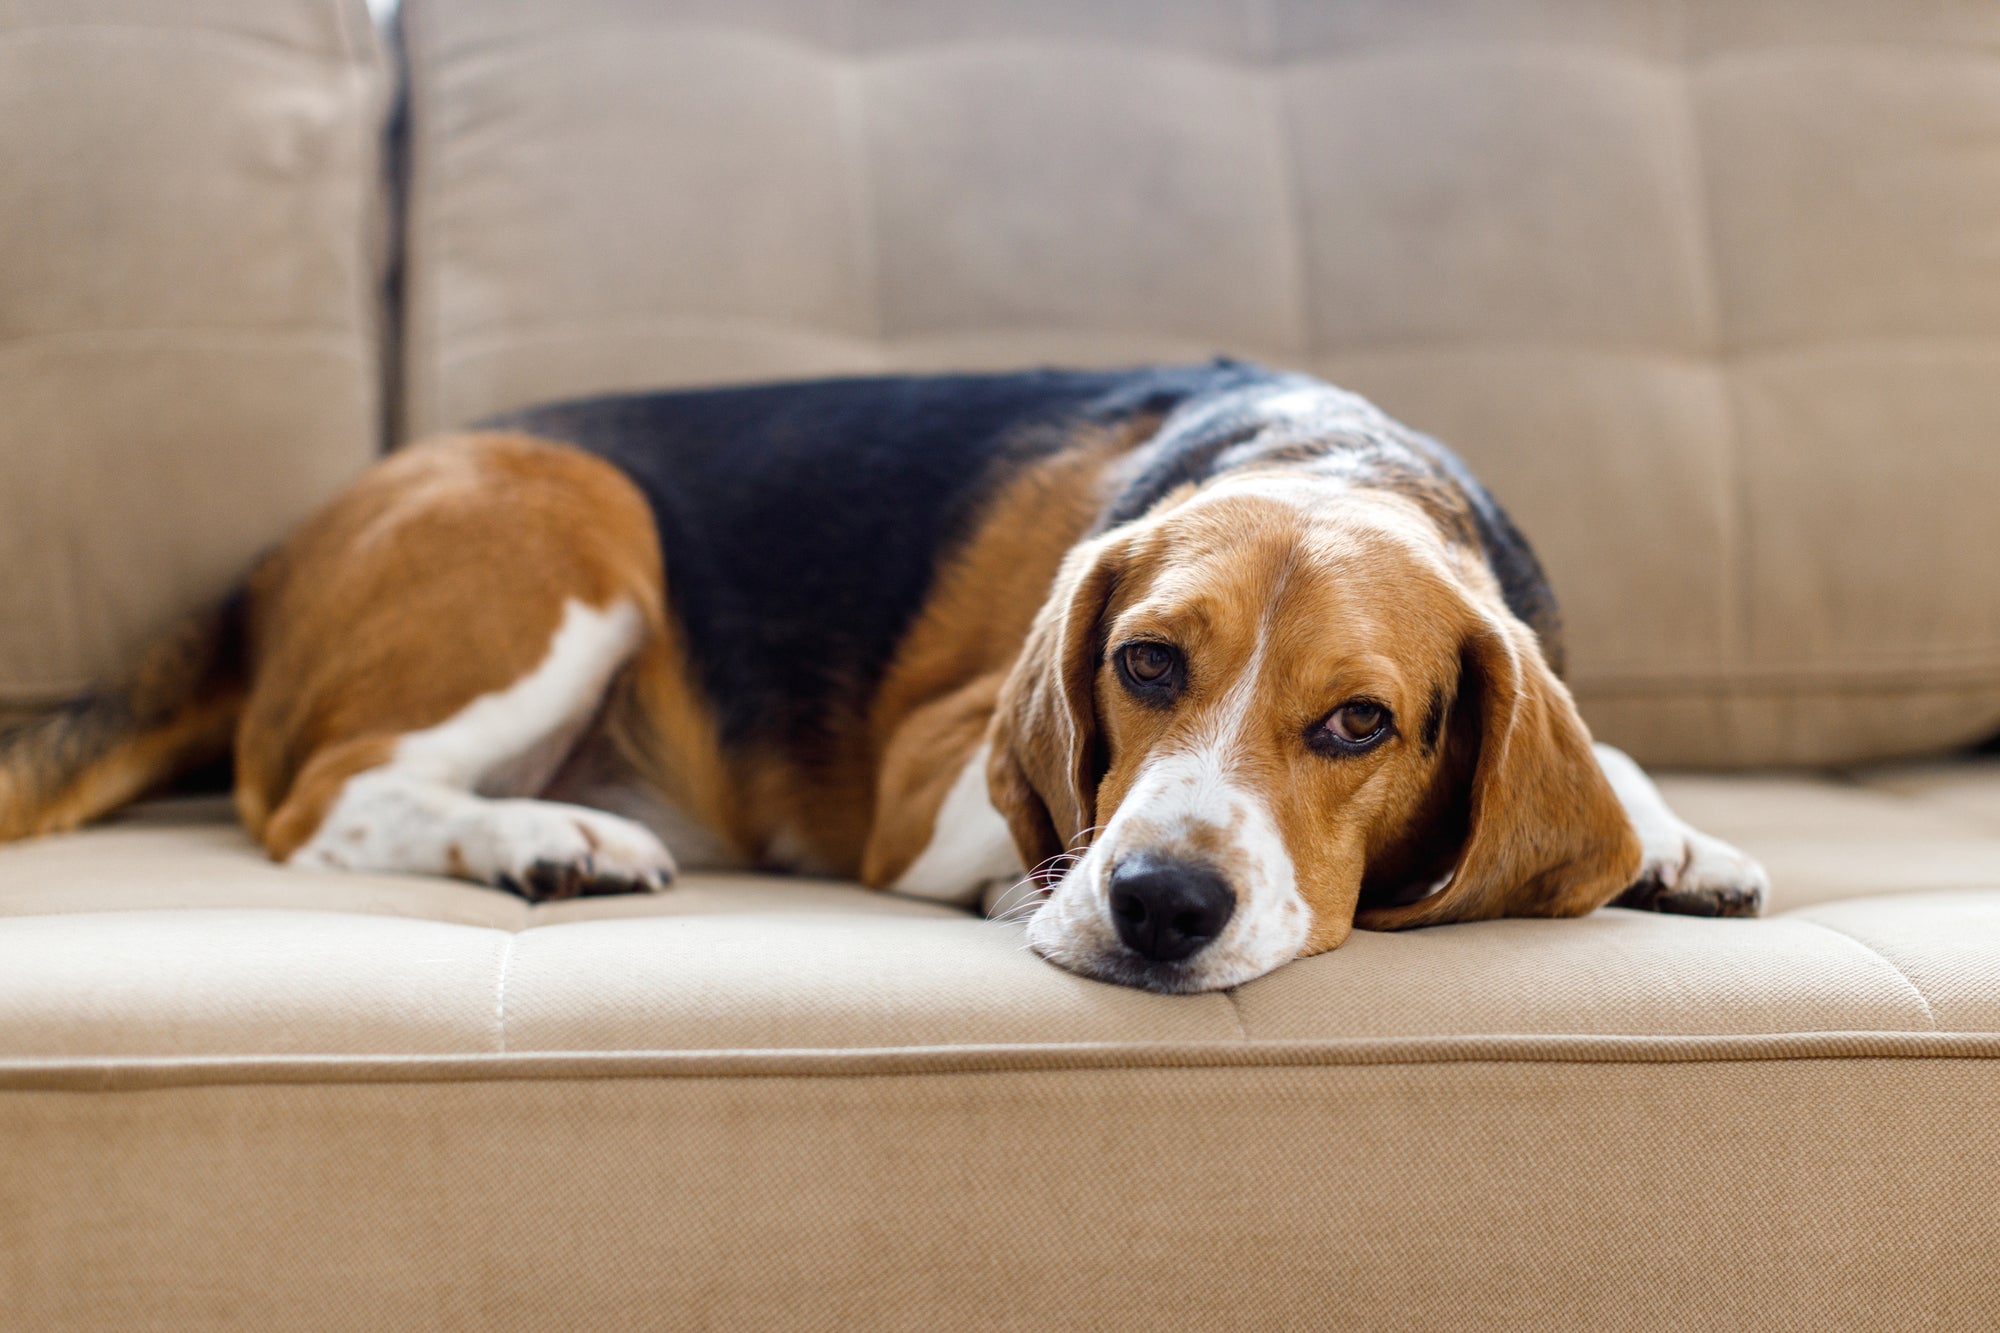 What Kinds of Things Can Cause Diarrhea in Dogs